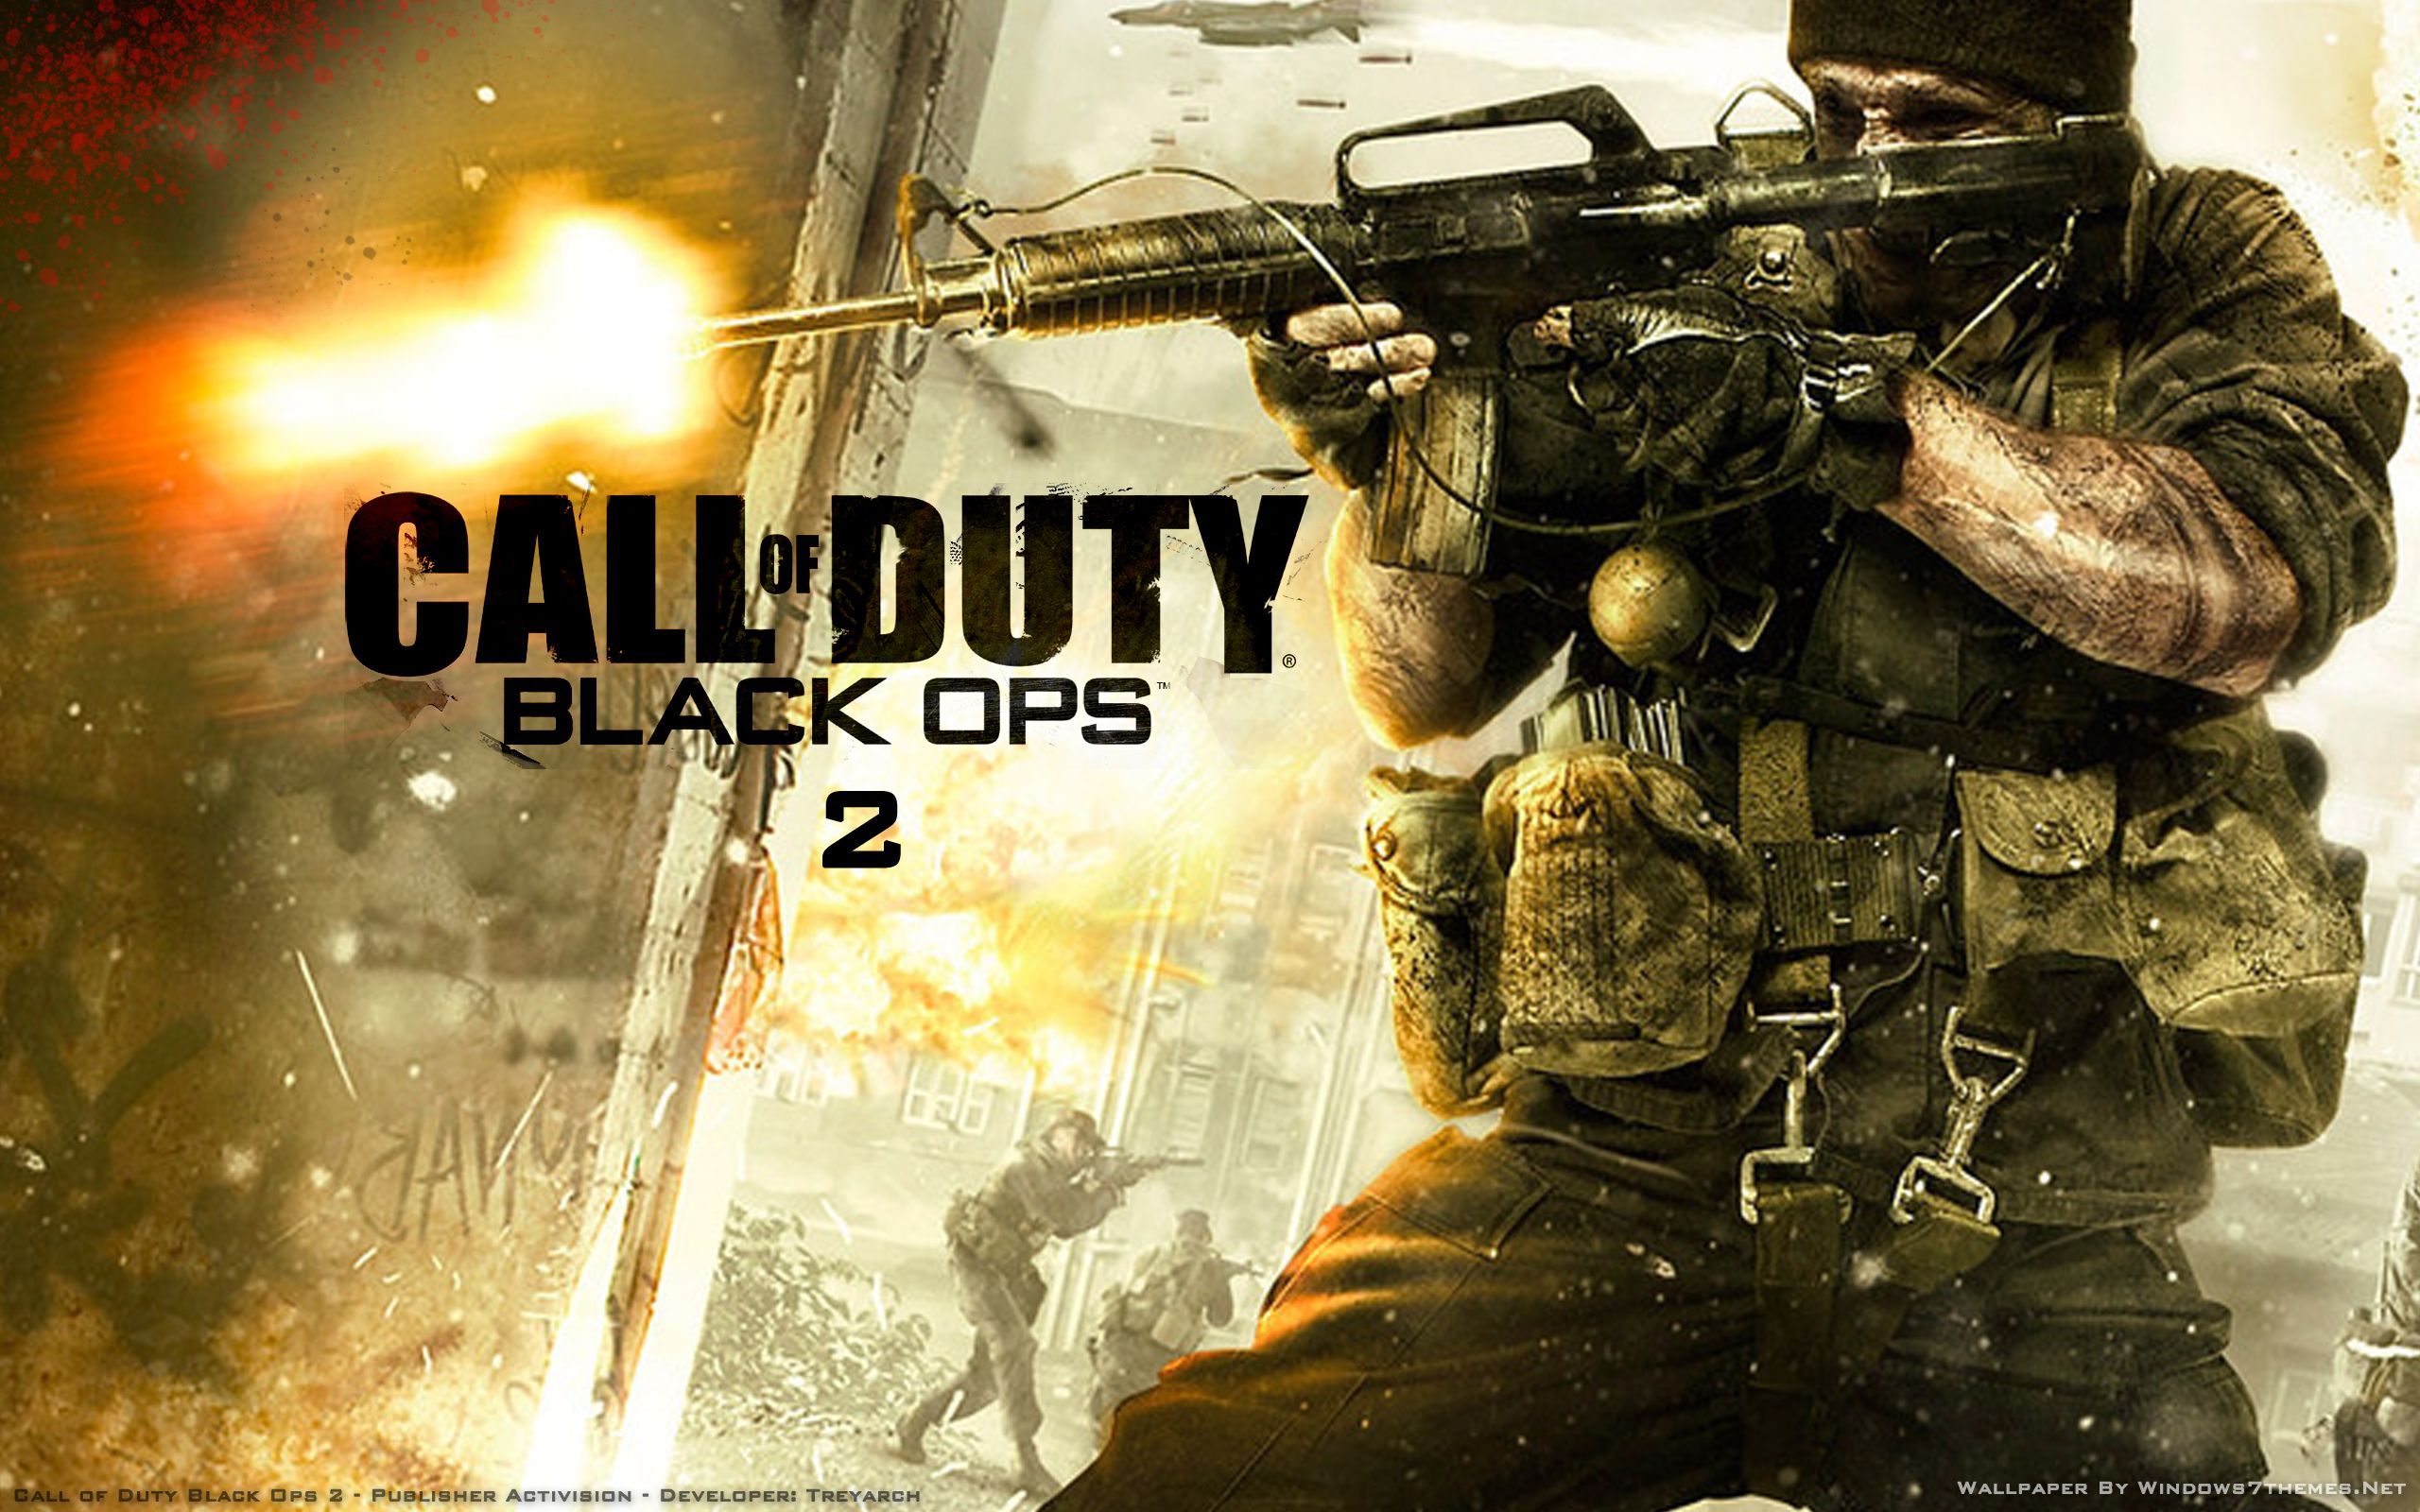 Call of duty black ops 2 wallpaper 1